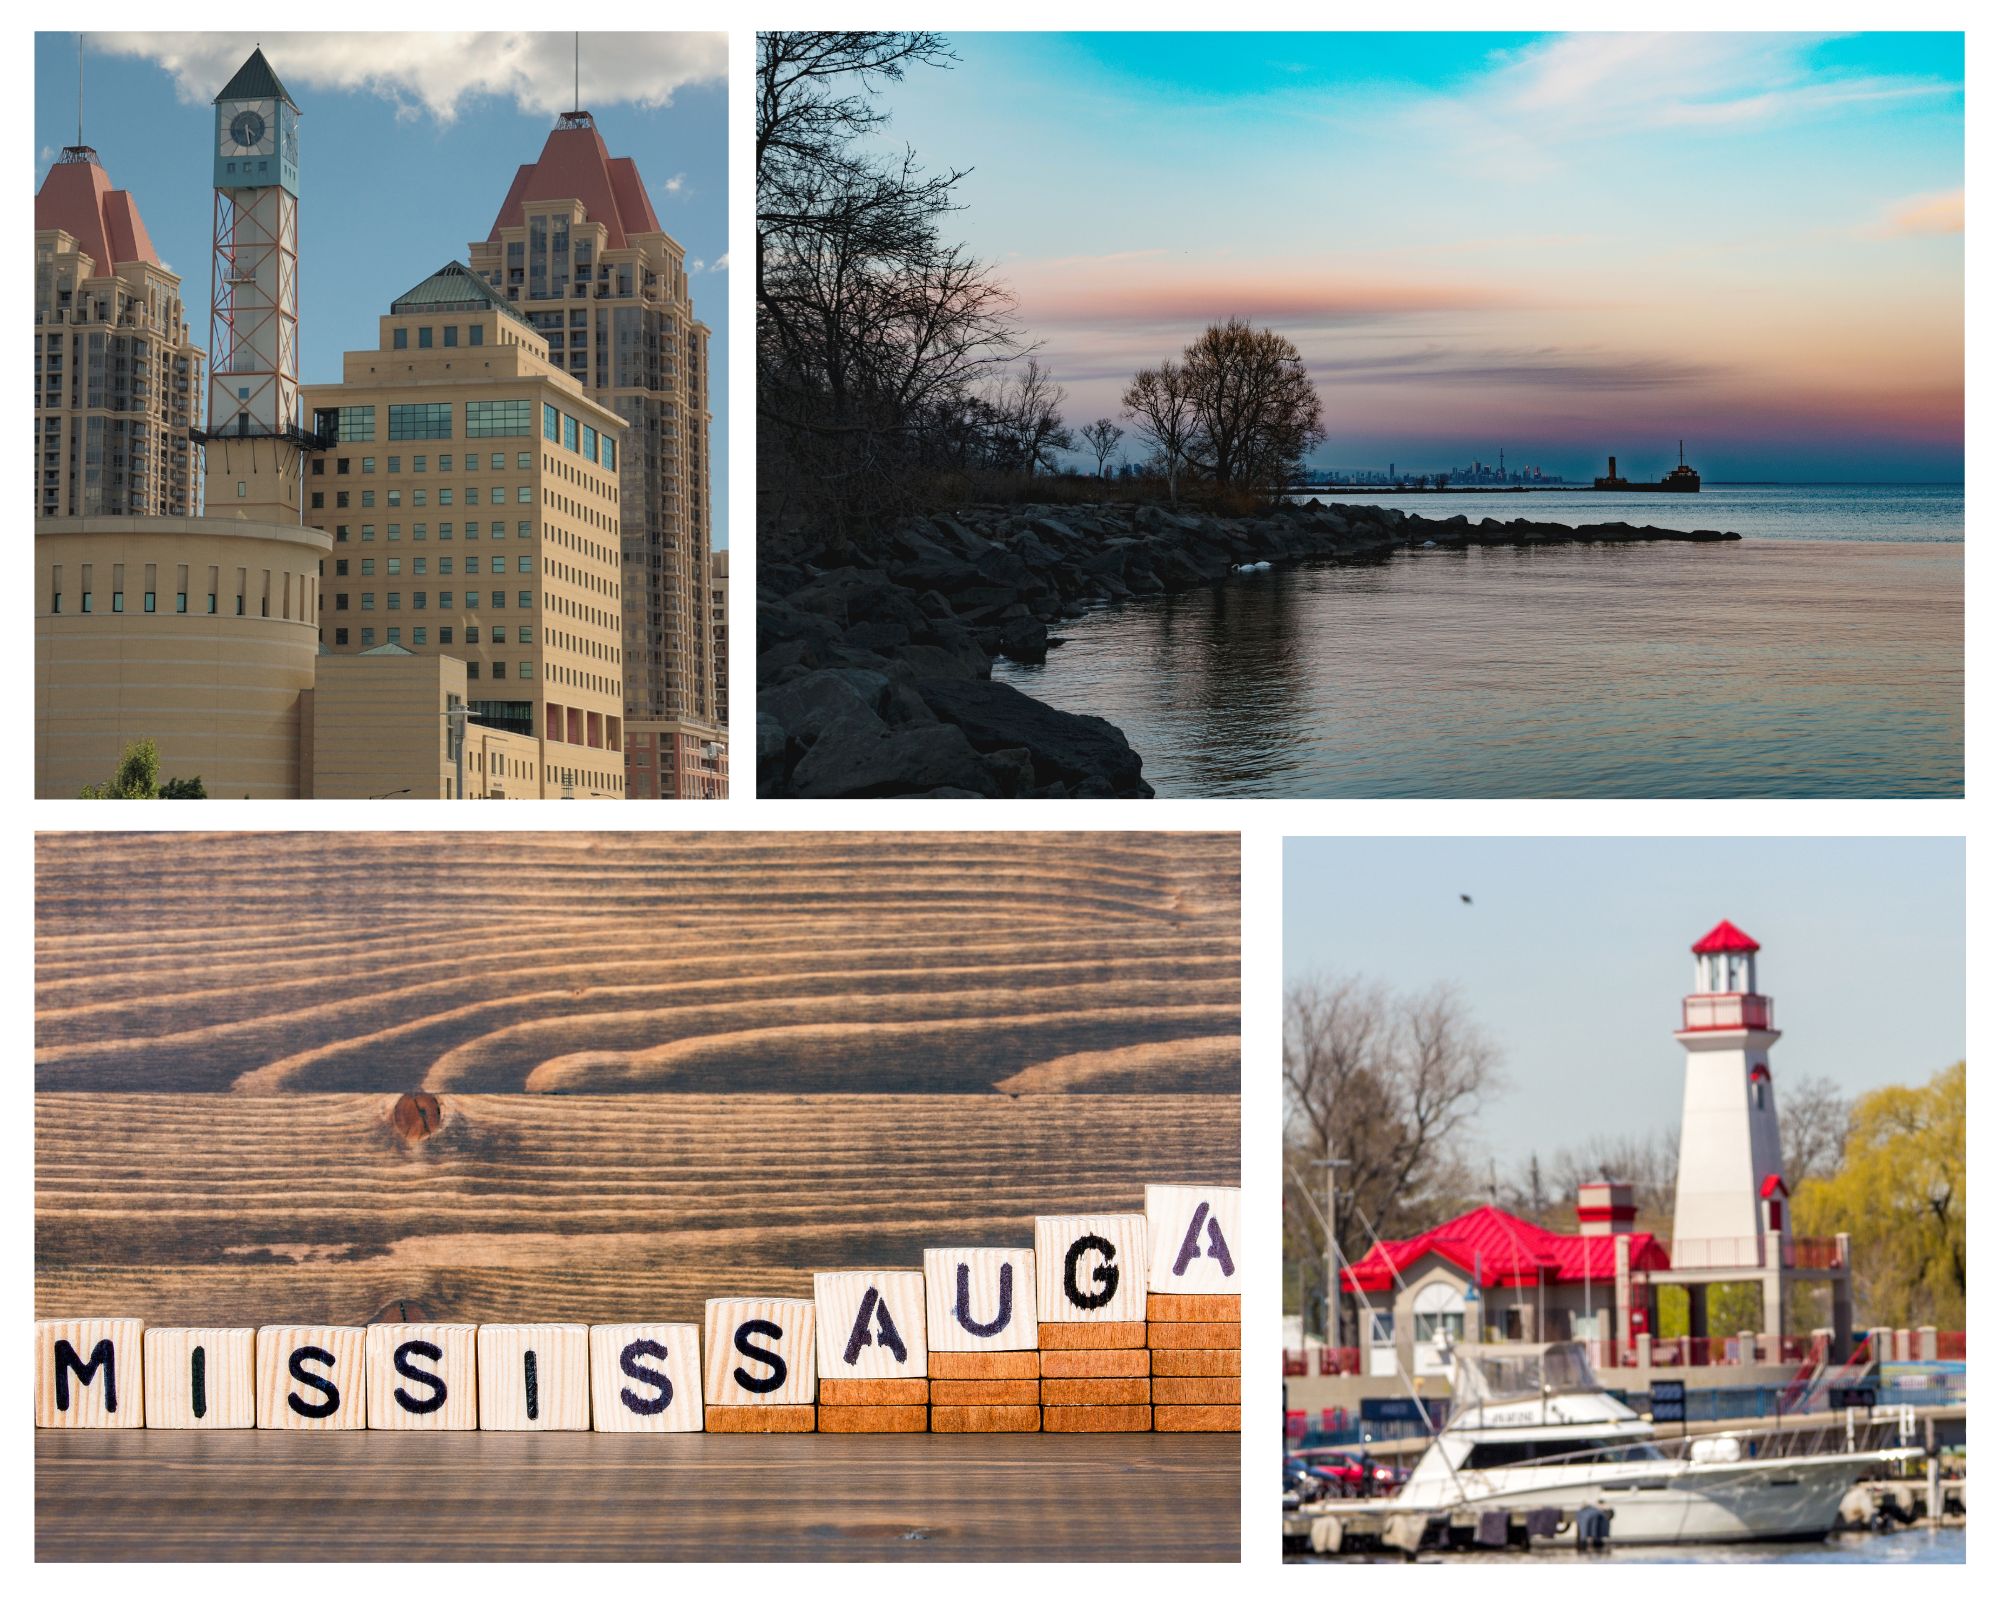 A Tribute To The City Of Mississauga, Ontario, Canada